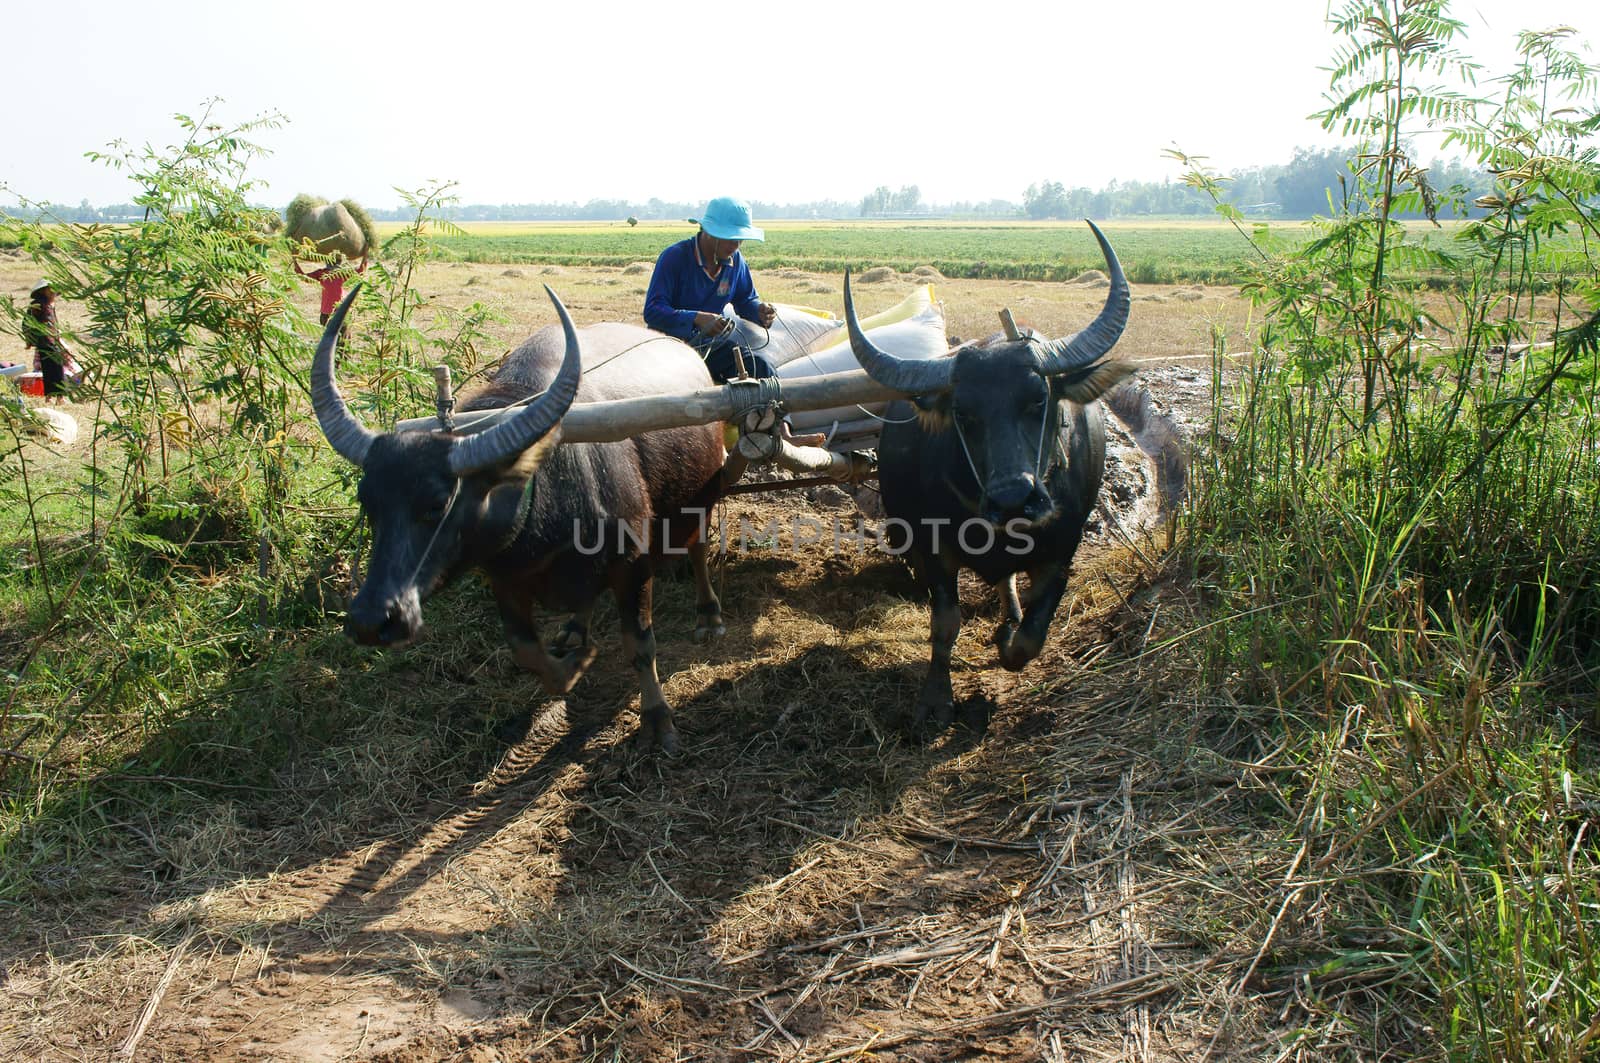 DONG THAP, VIET NAM- NOVEMBER 12: Buffalo cart try transport paddy in rice sack after harvest on farmland go through marshy area ,Dong Thap, Viet Nam, November 12, 2013 